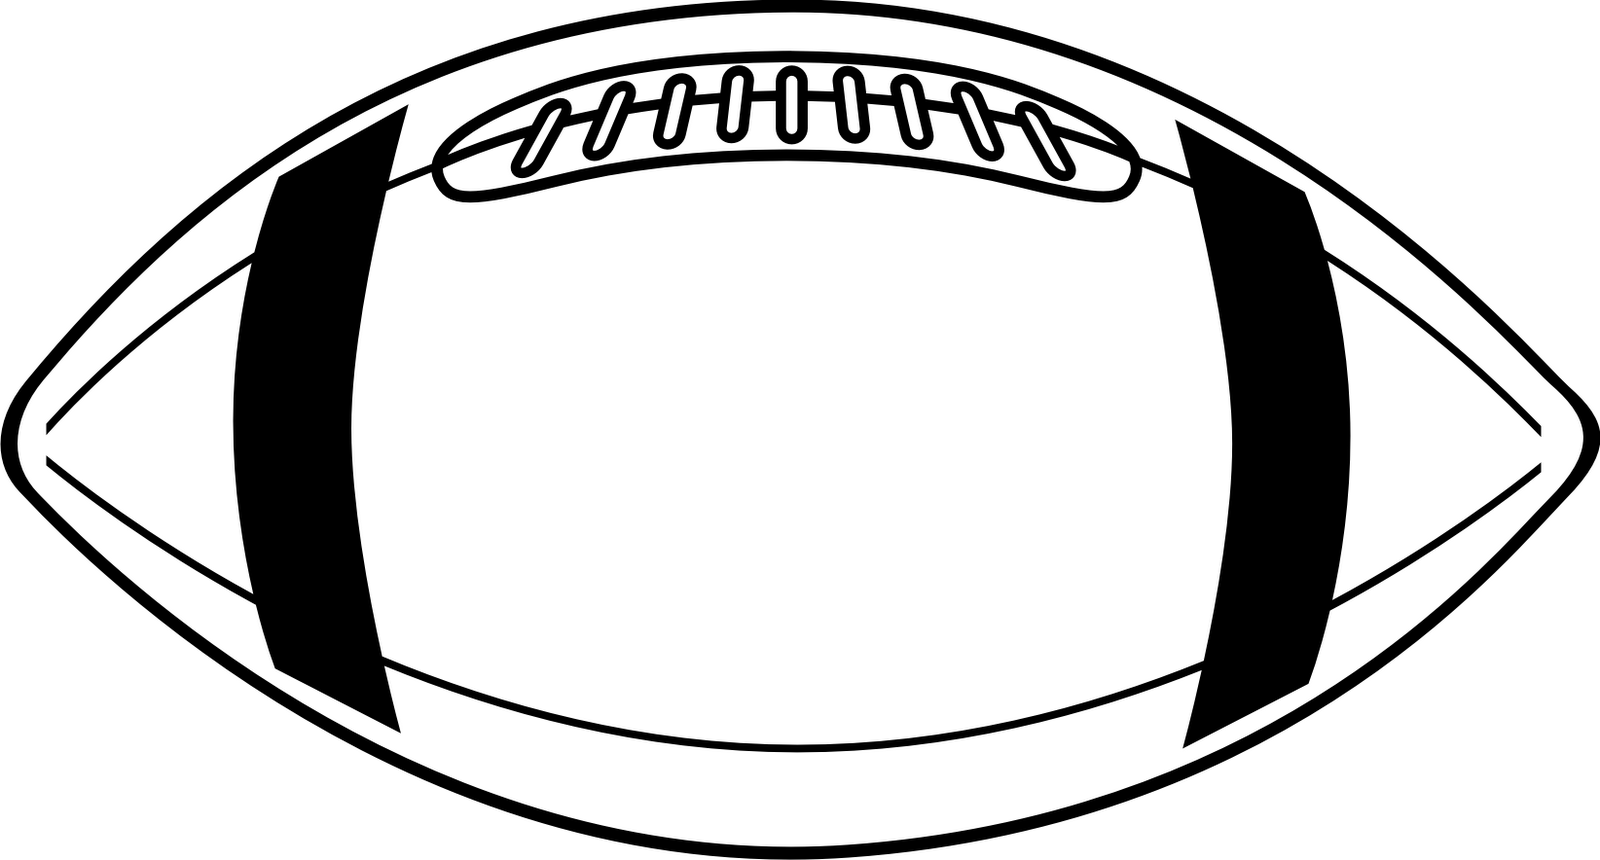 Football field clipart black and white